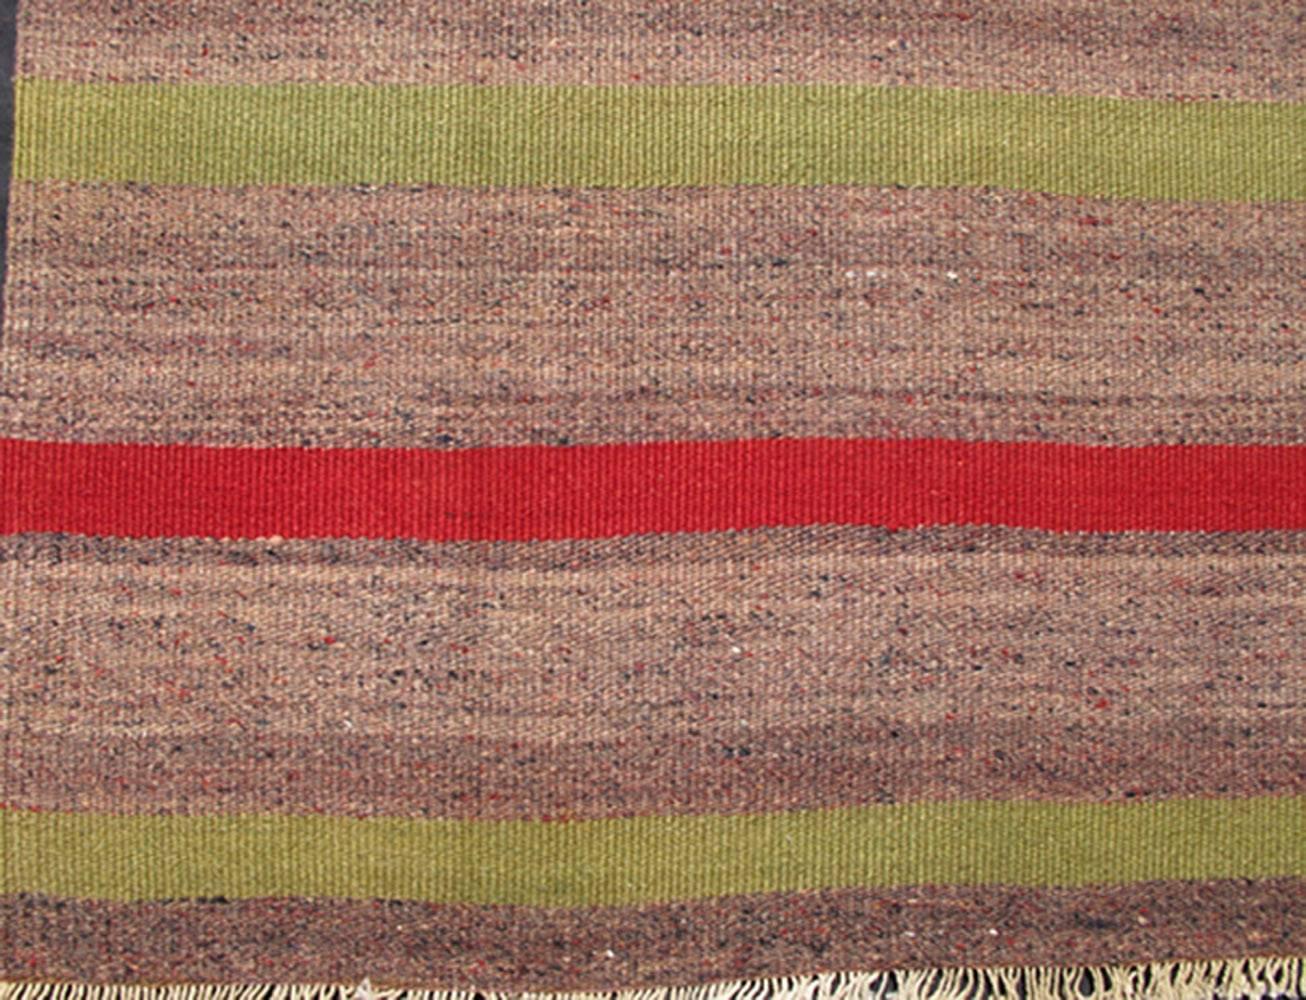 Turkish Kilim Vintage Carpet in Red and Green Stripes
rug/tu-ned-37,  origin/turkey

This vintage Kilim carpet from Mid-Century Turkey features a stripe pattern set atop a mocha and taupe background. Colors include red and light green.
Measures: